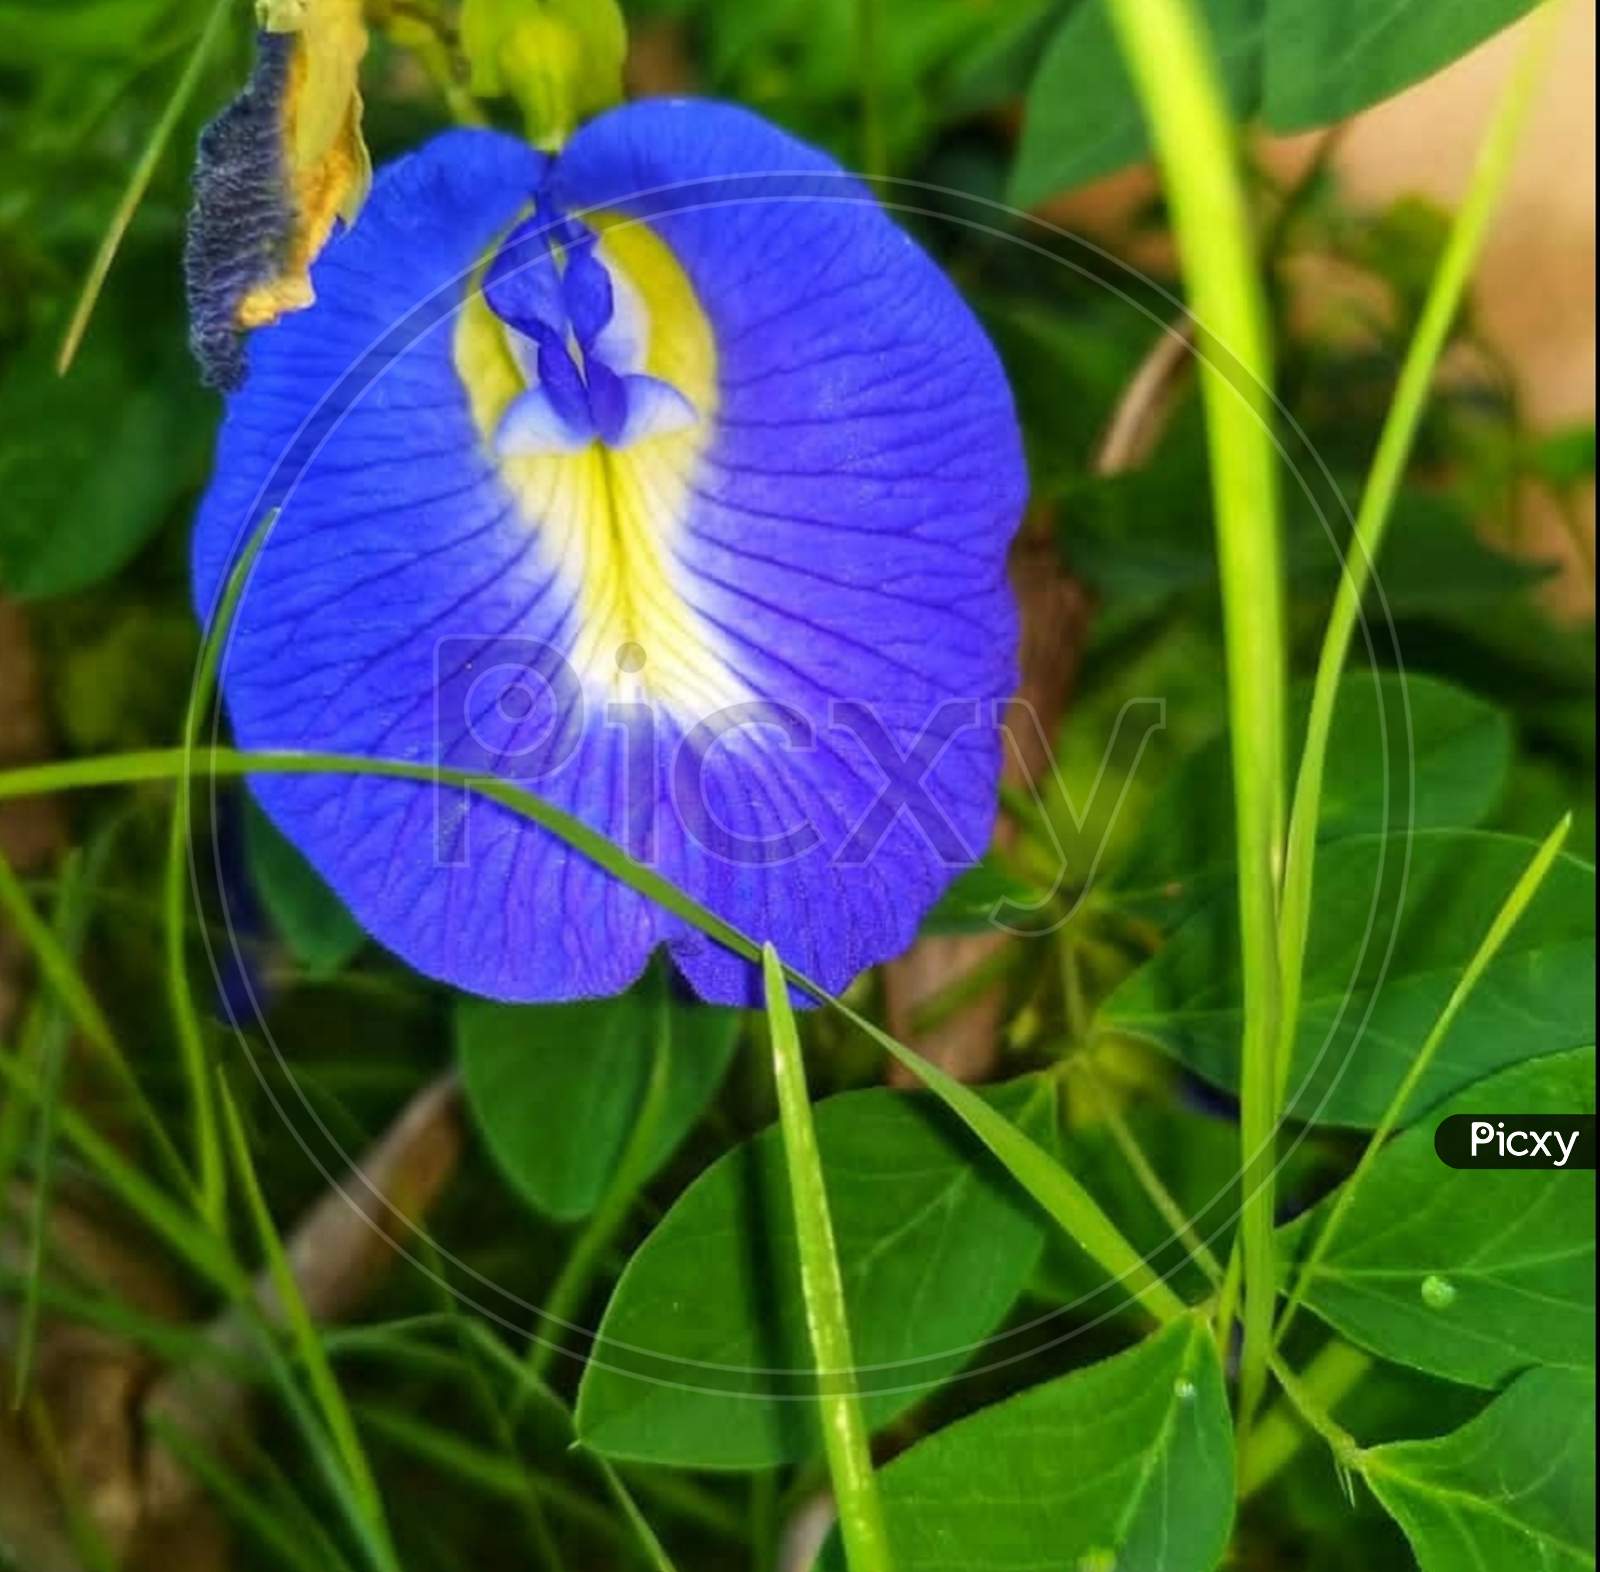 Violet×Remove  Morning glory×Remove  Flowering plant×Remove  Plant×Remove  Flower×Remove  Petal×Remove  Wildflower×Remove  Plant stem×Remove  Leaf×Remove